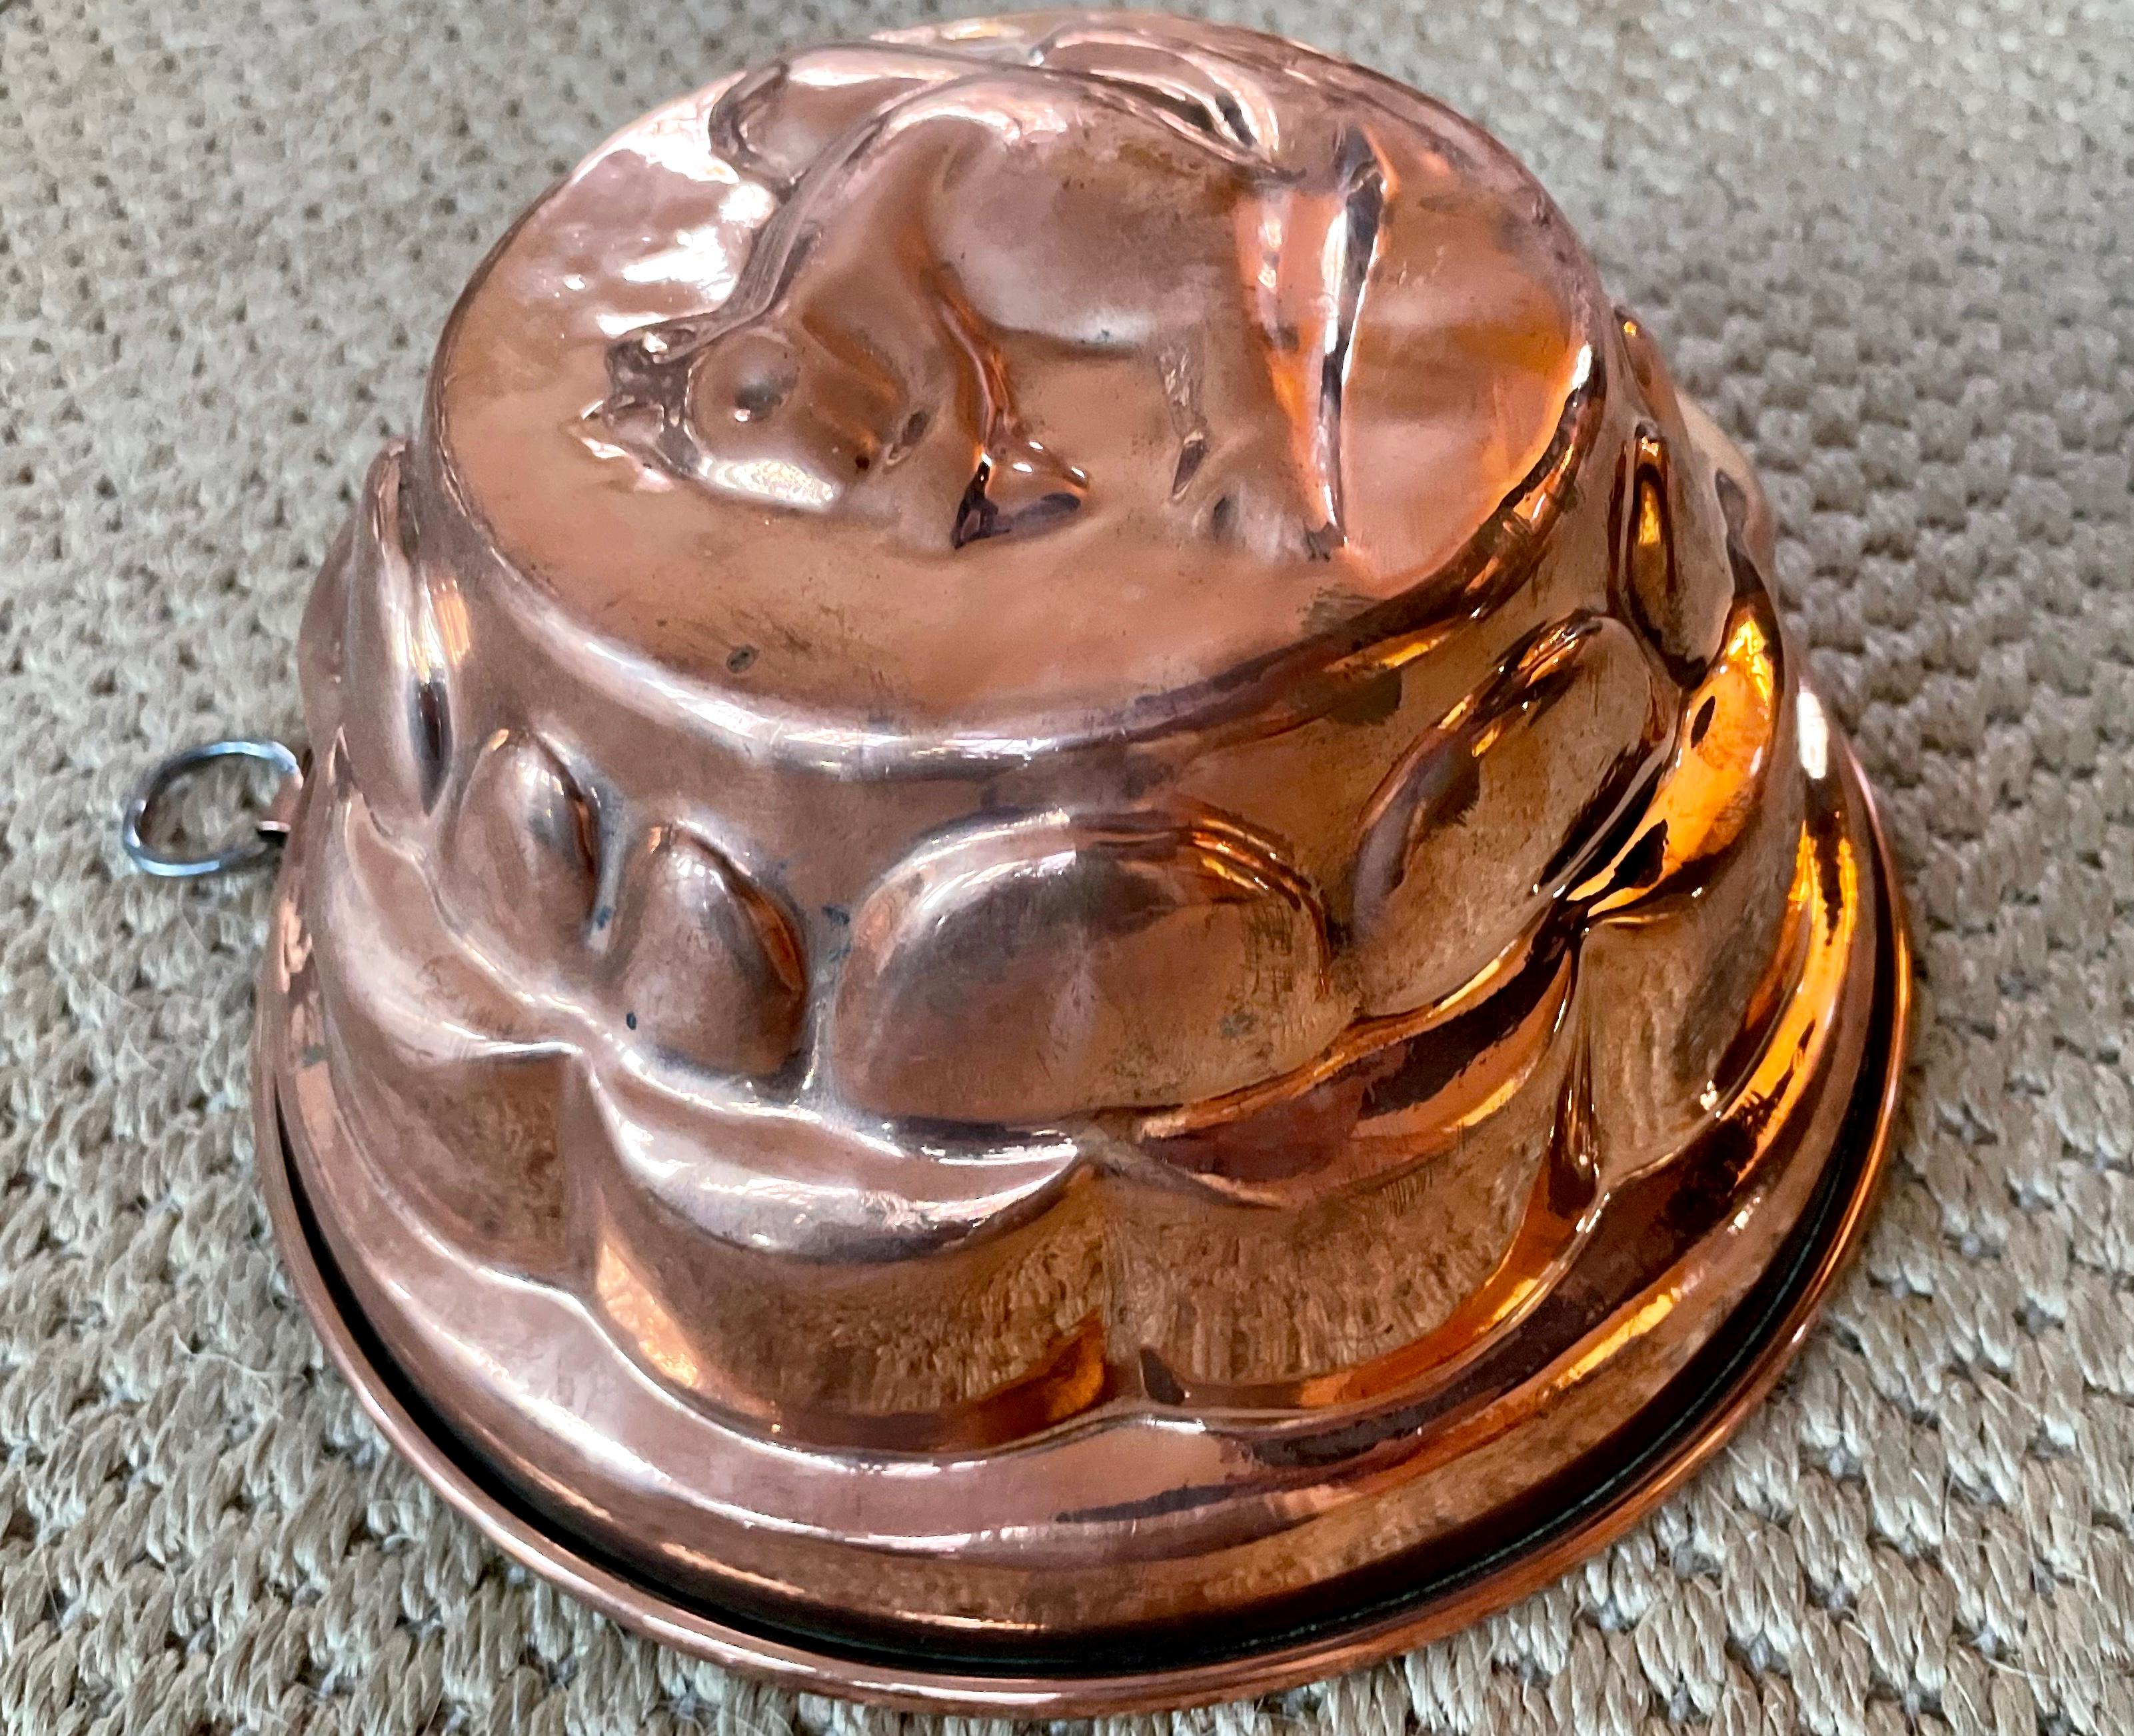 Vintage squirrel copper mould. Circular dome paneled mould with squirrel and acorn top. France, twentieth century. 
Dimensions: 9”diameter x 4.5